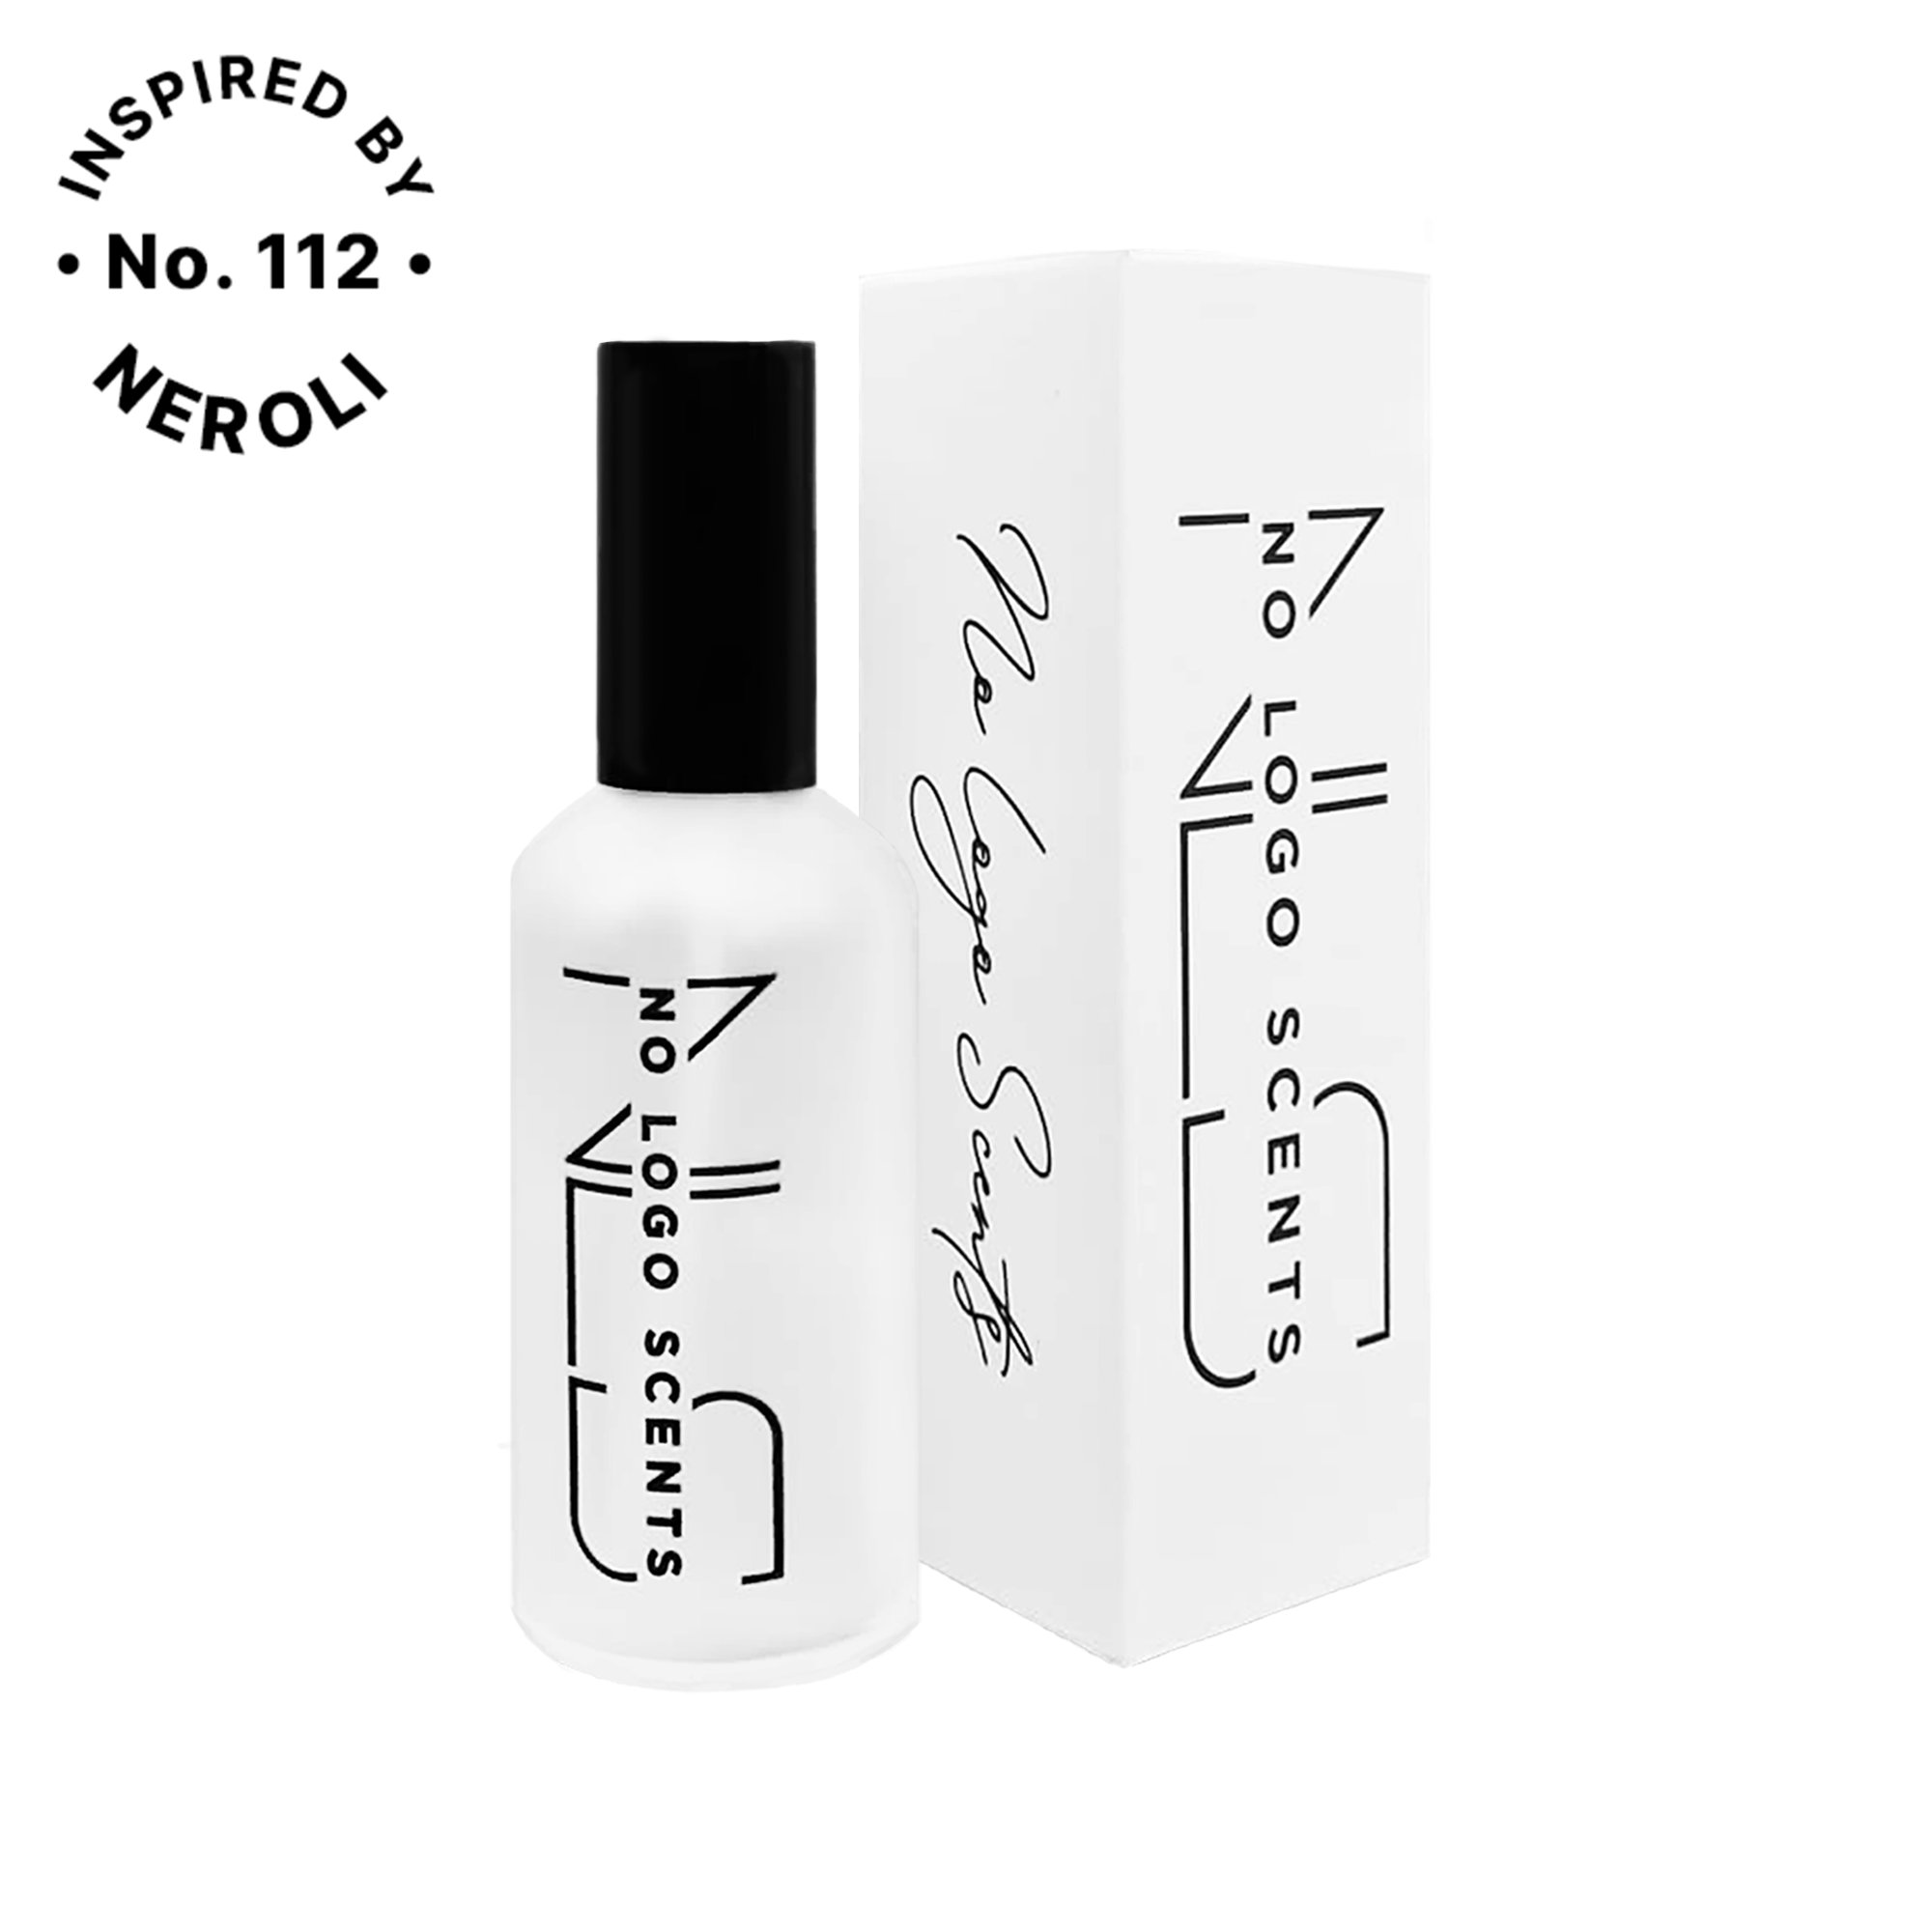 No.112 – INSPIRED BY NEROLI from category UNISEX PERFUMES - 1